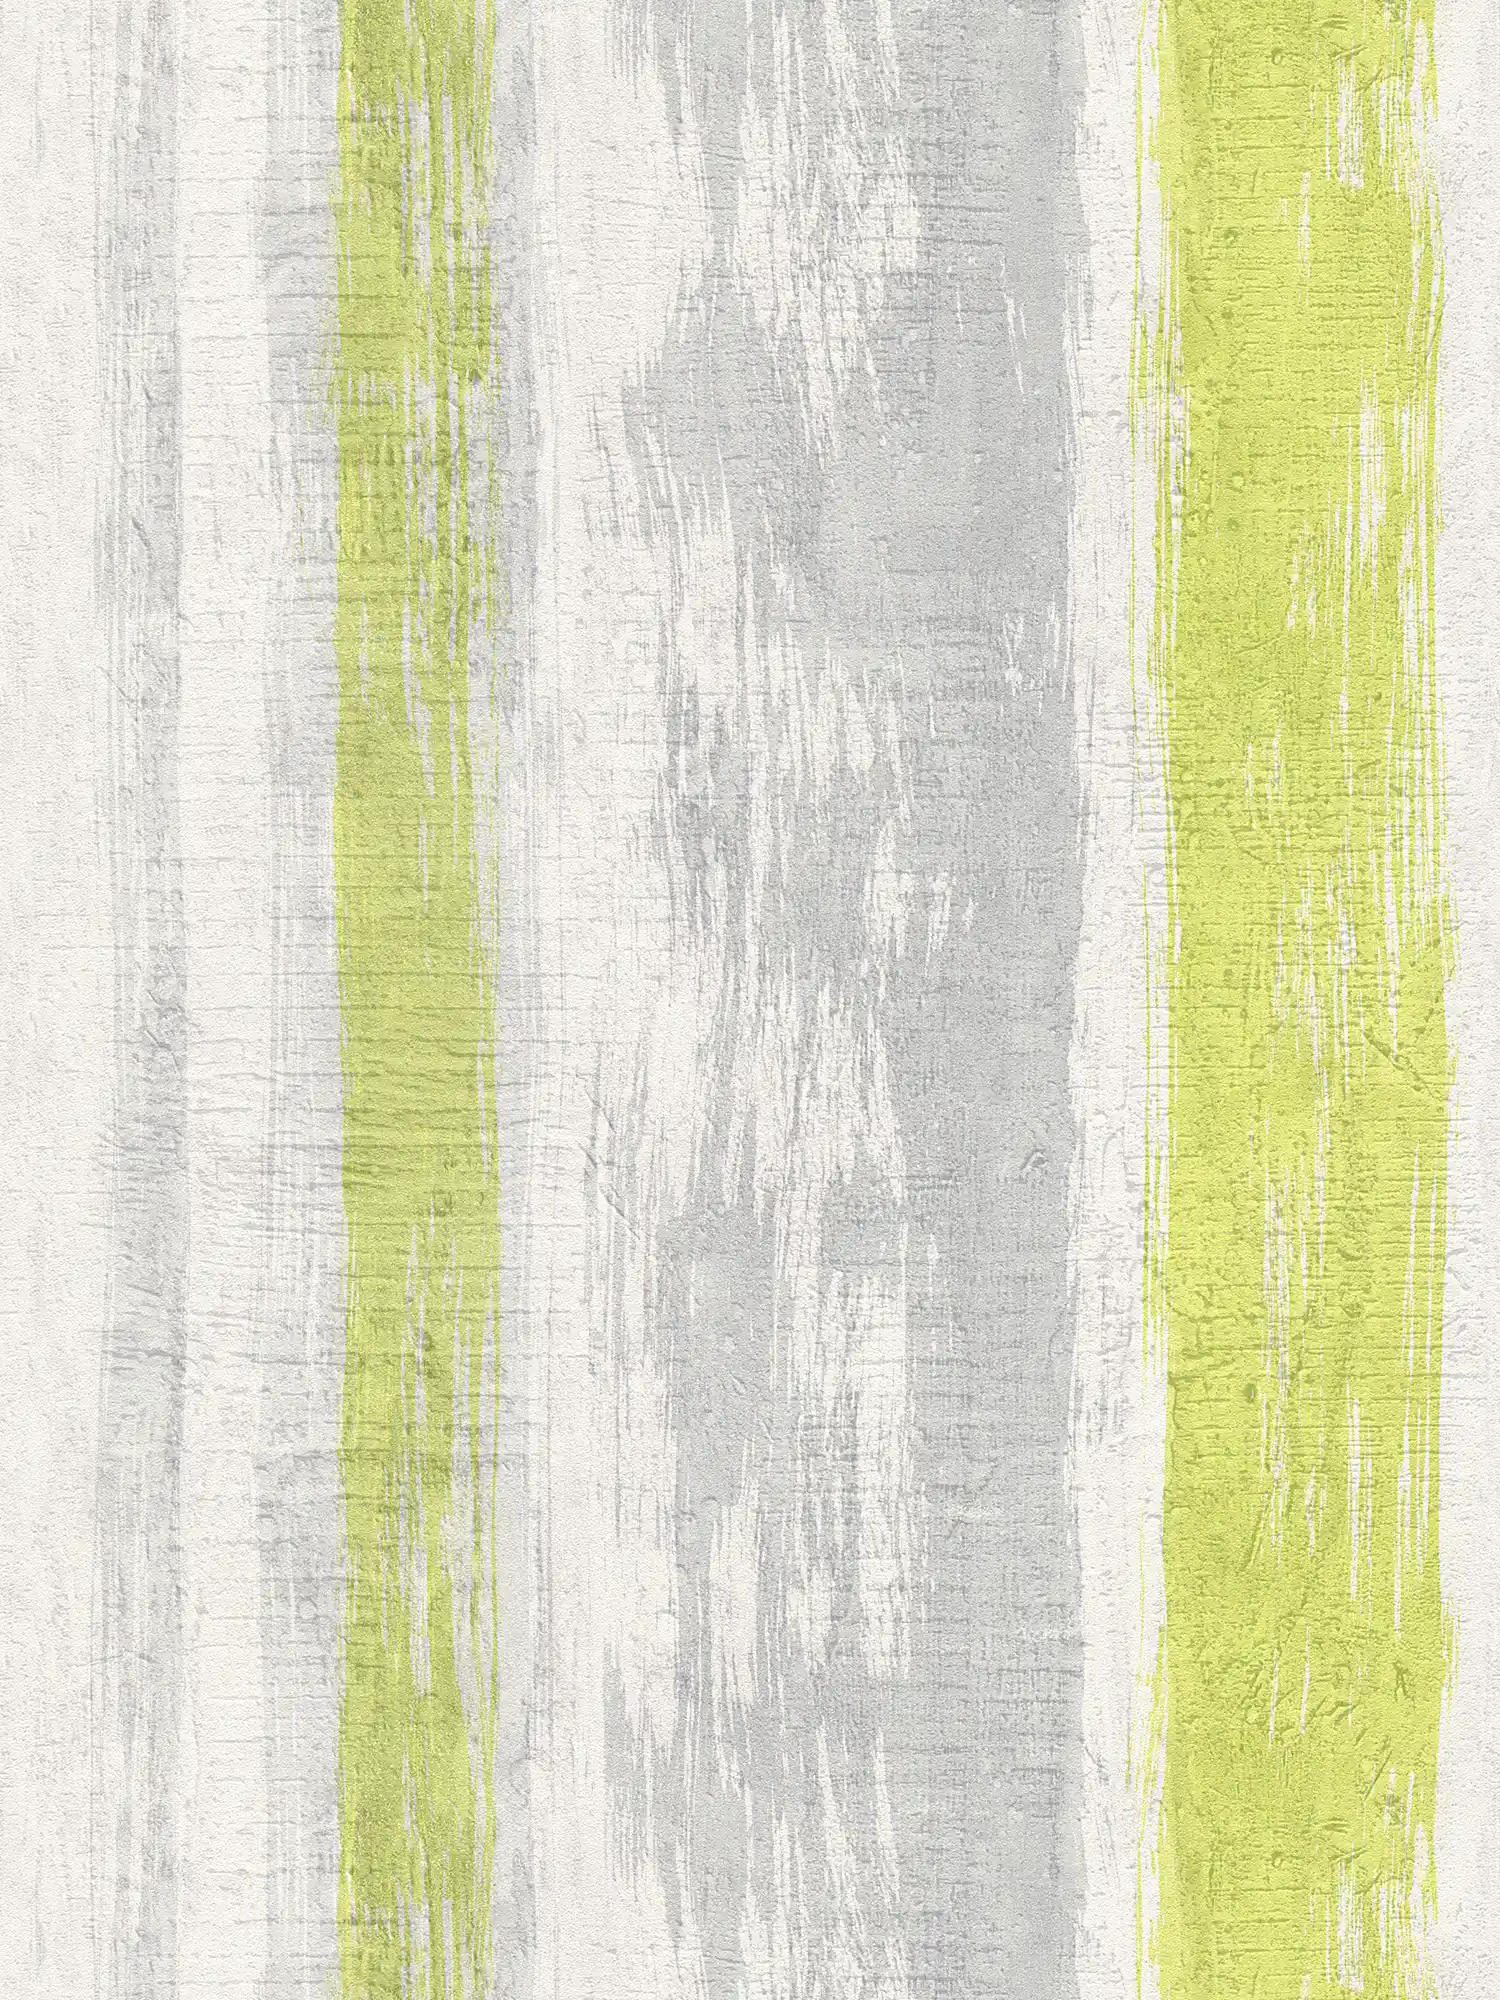 Striped wallpaper with plaster texture & coloured accent - grey, green, yellow
